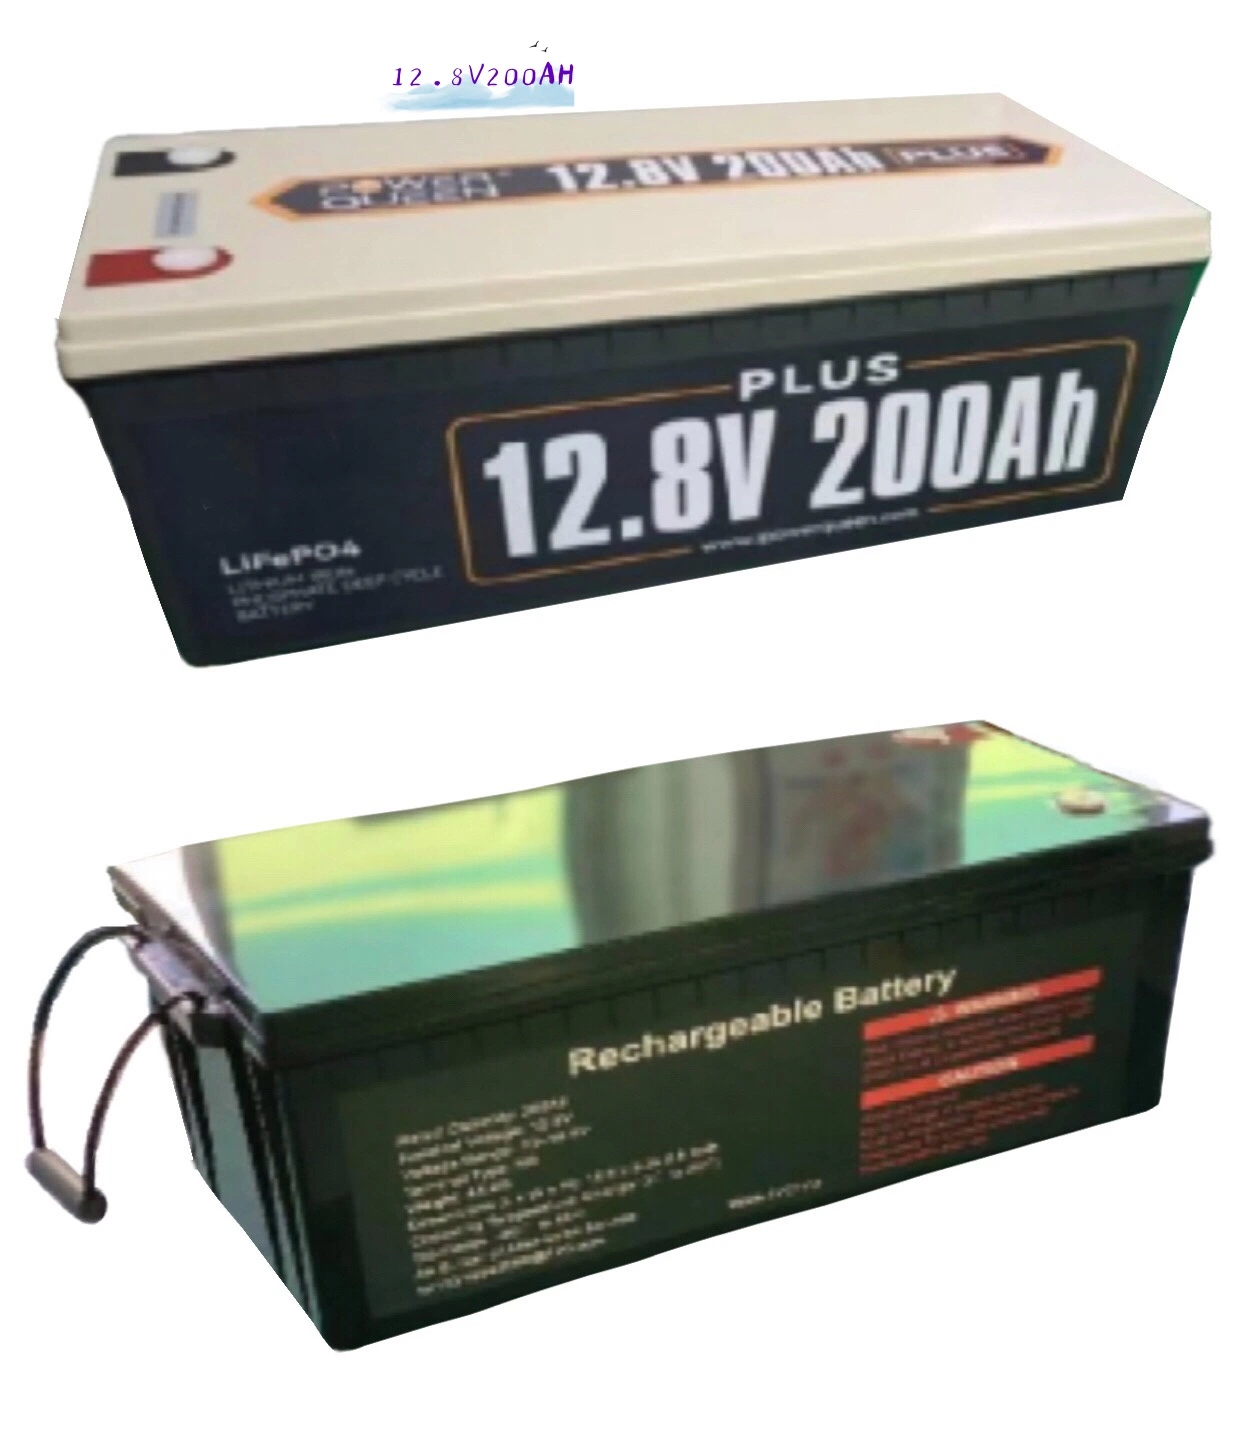 Kebe Lithium Battery Replacement SLA for Slow Speed Car 12.8V 200ah